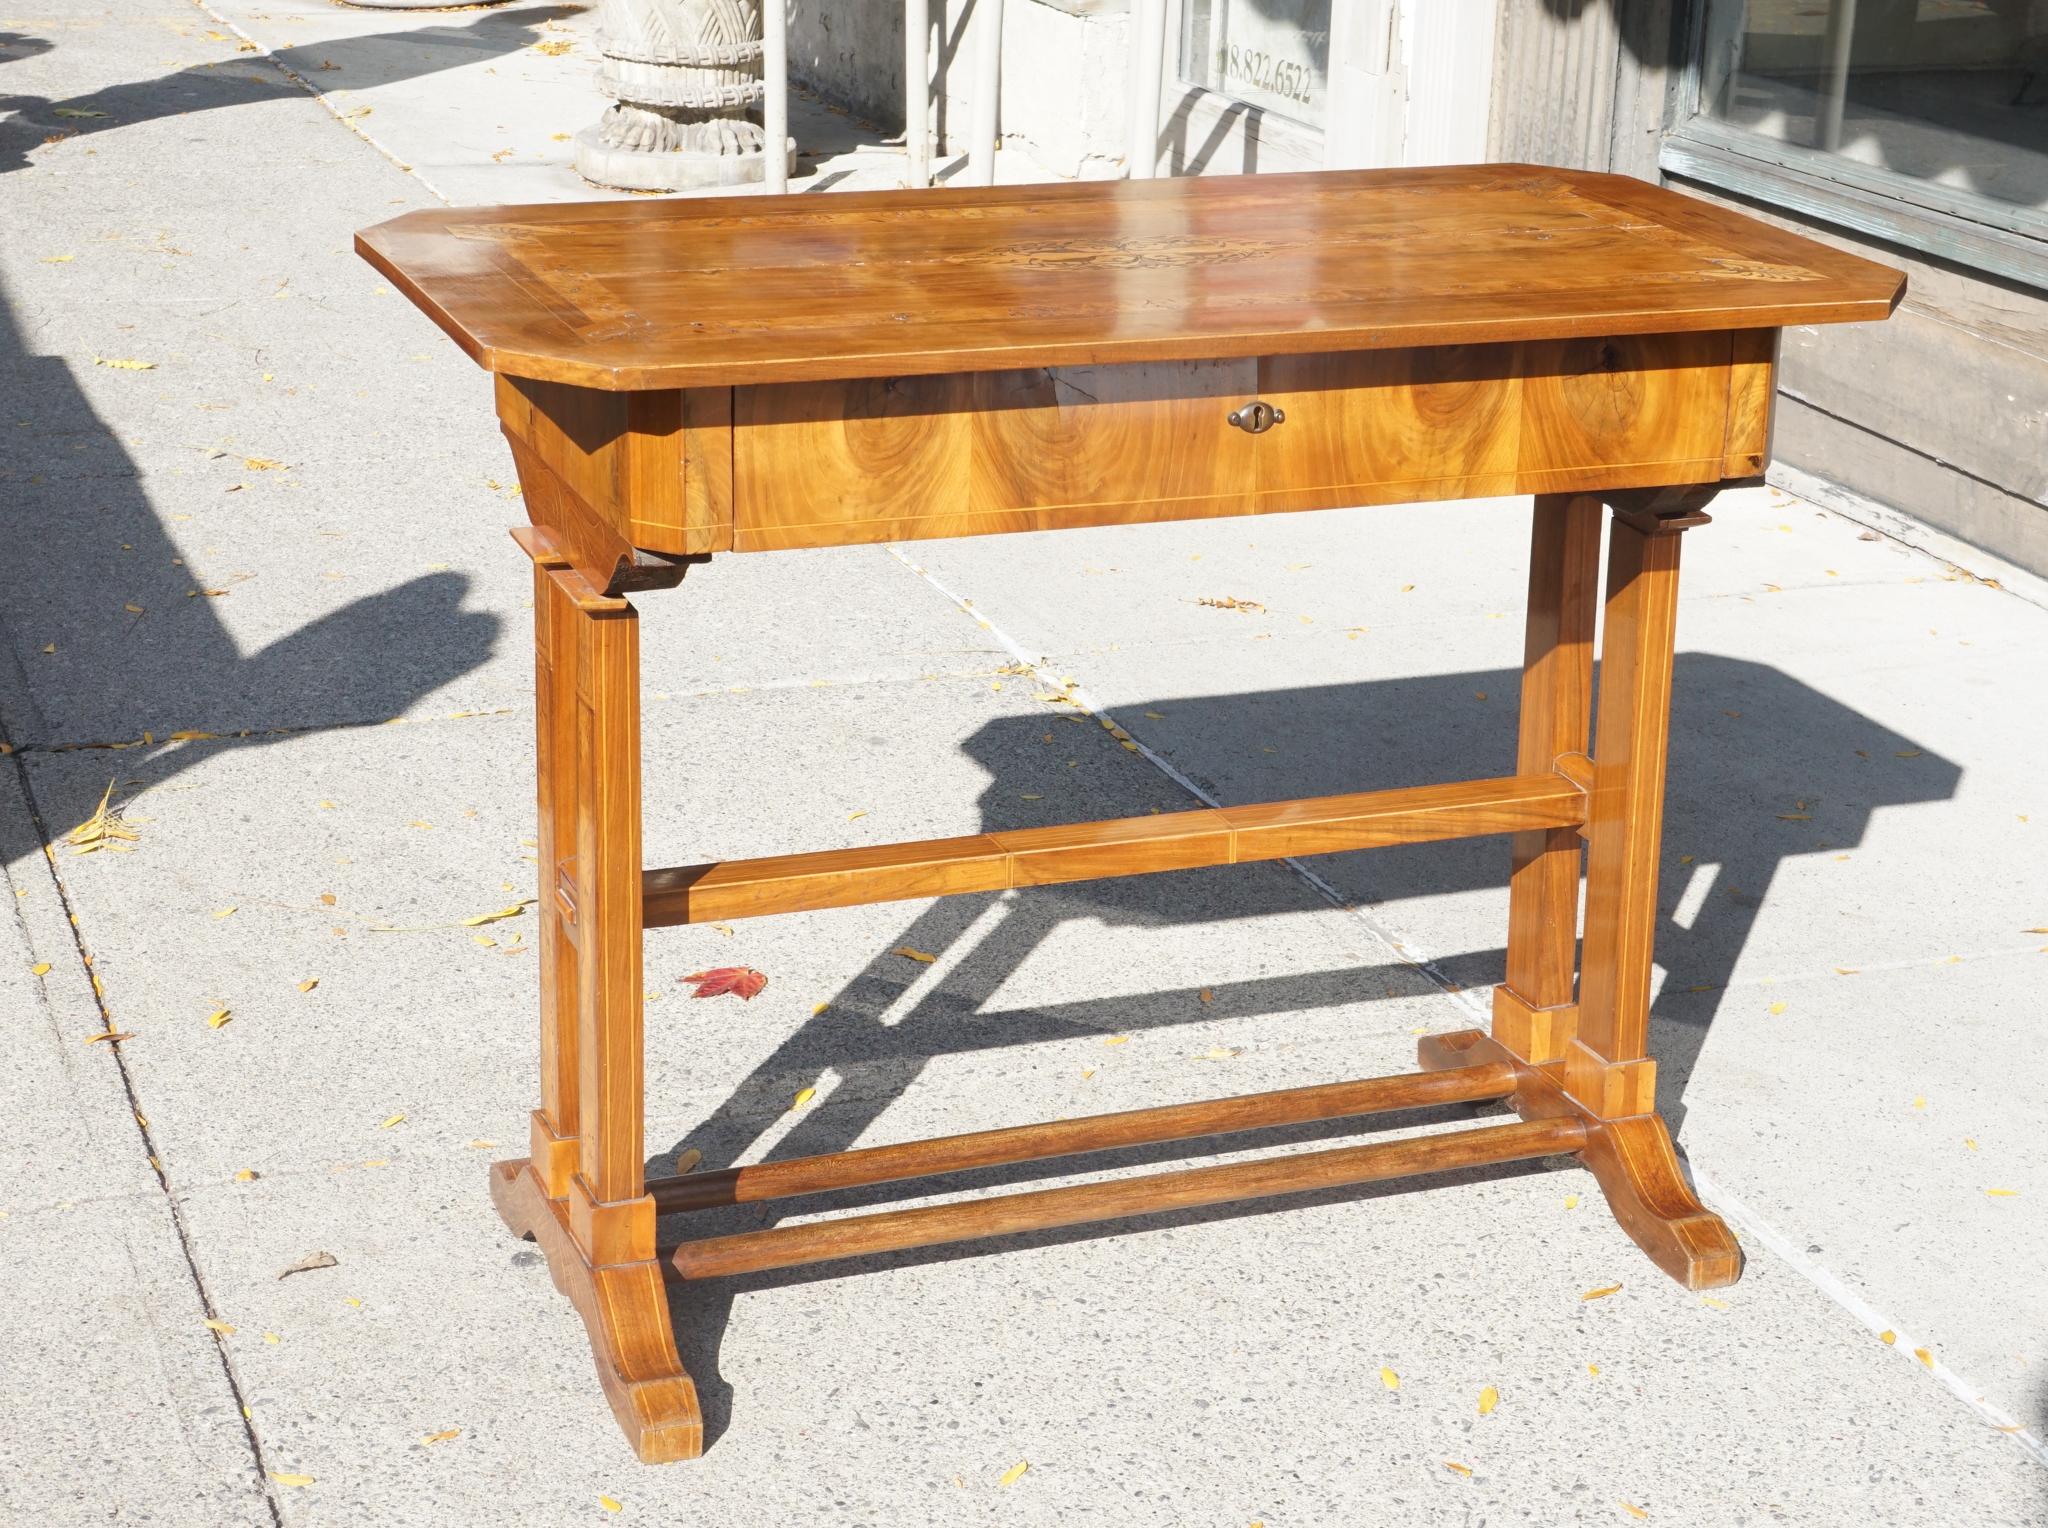 Made circa 1830 this fine table is crafted of walnut, fruitwood and birds eye maple veneers that have been decorated with satinwood inlays. The writing surface is accompanied by one long drawer in the apron. The decorative pattern of the inlay